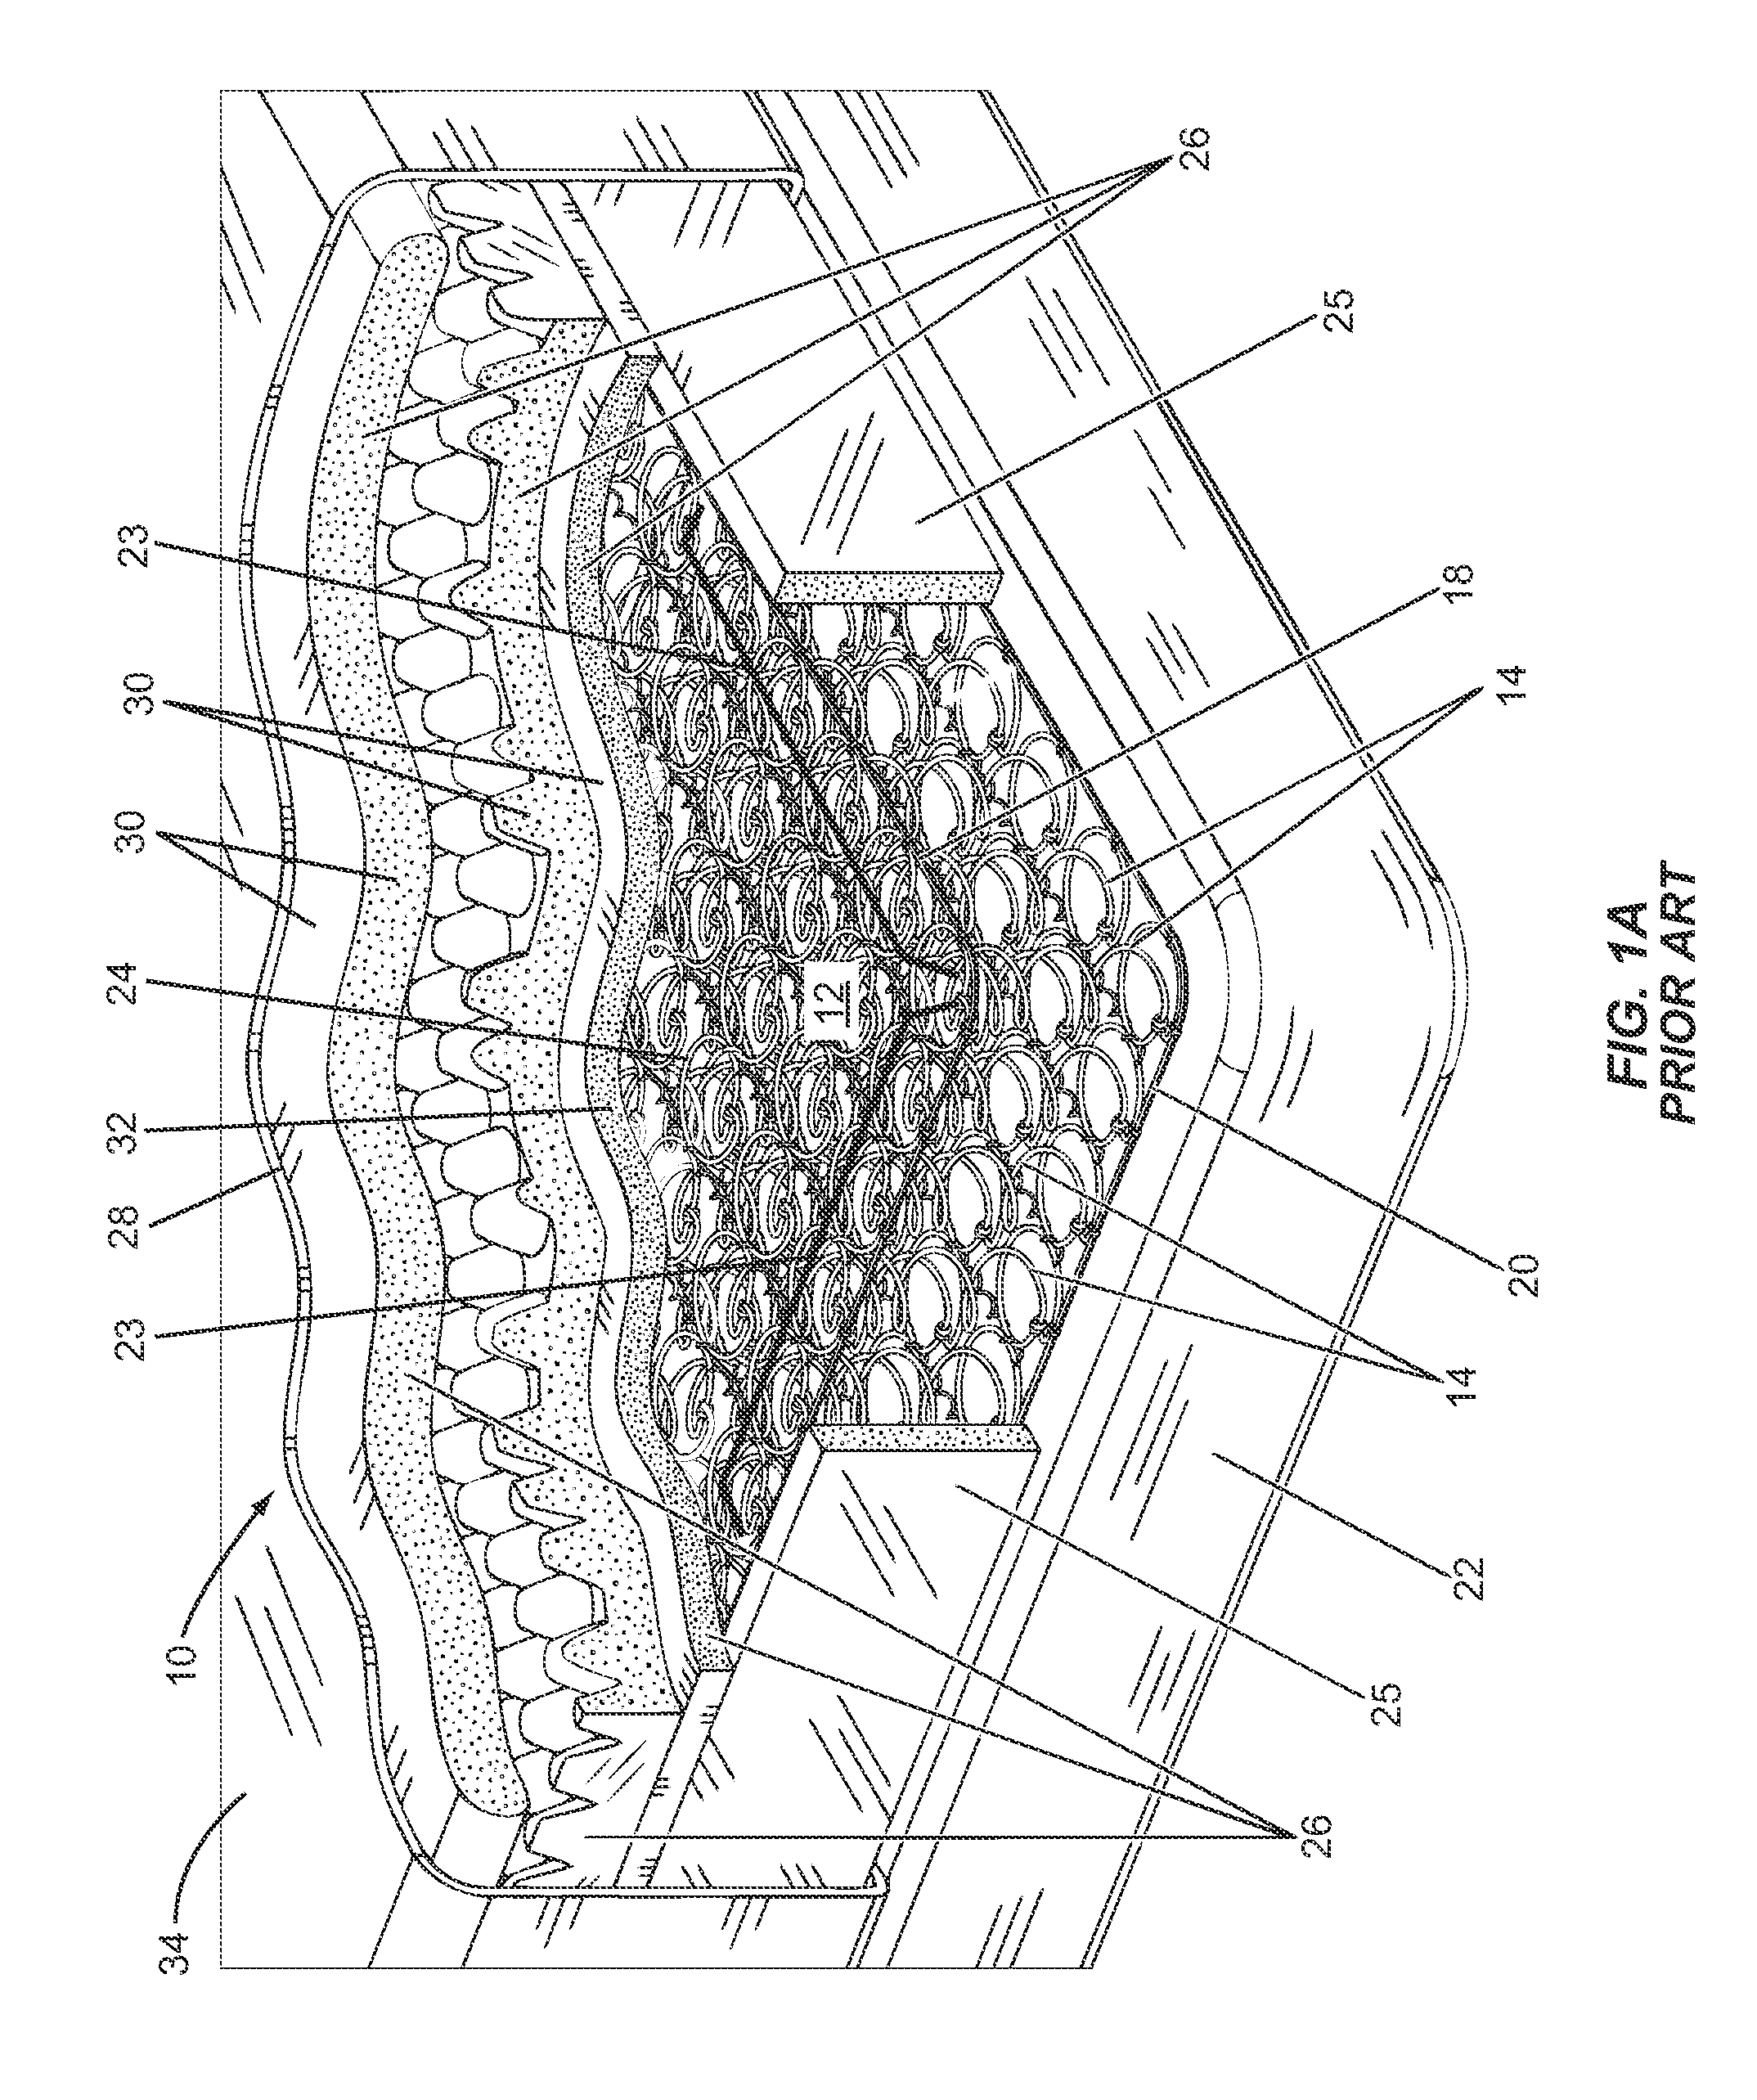 All-foam mattress assemblies with foam engineered cores having thermoplastic and thermoset materials, and related assemblies and methods